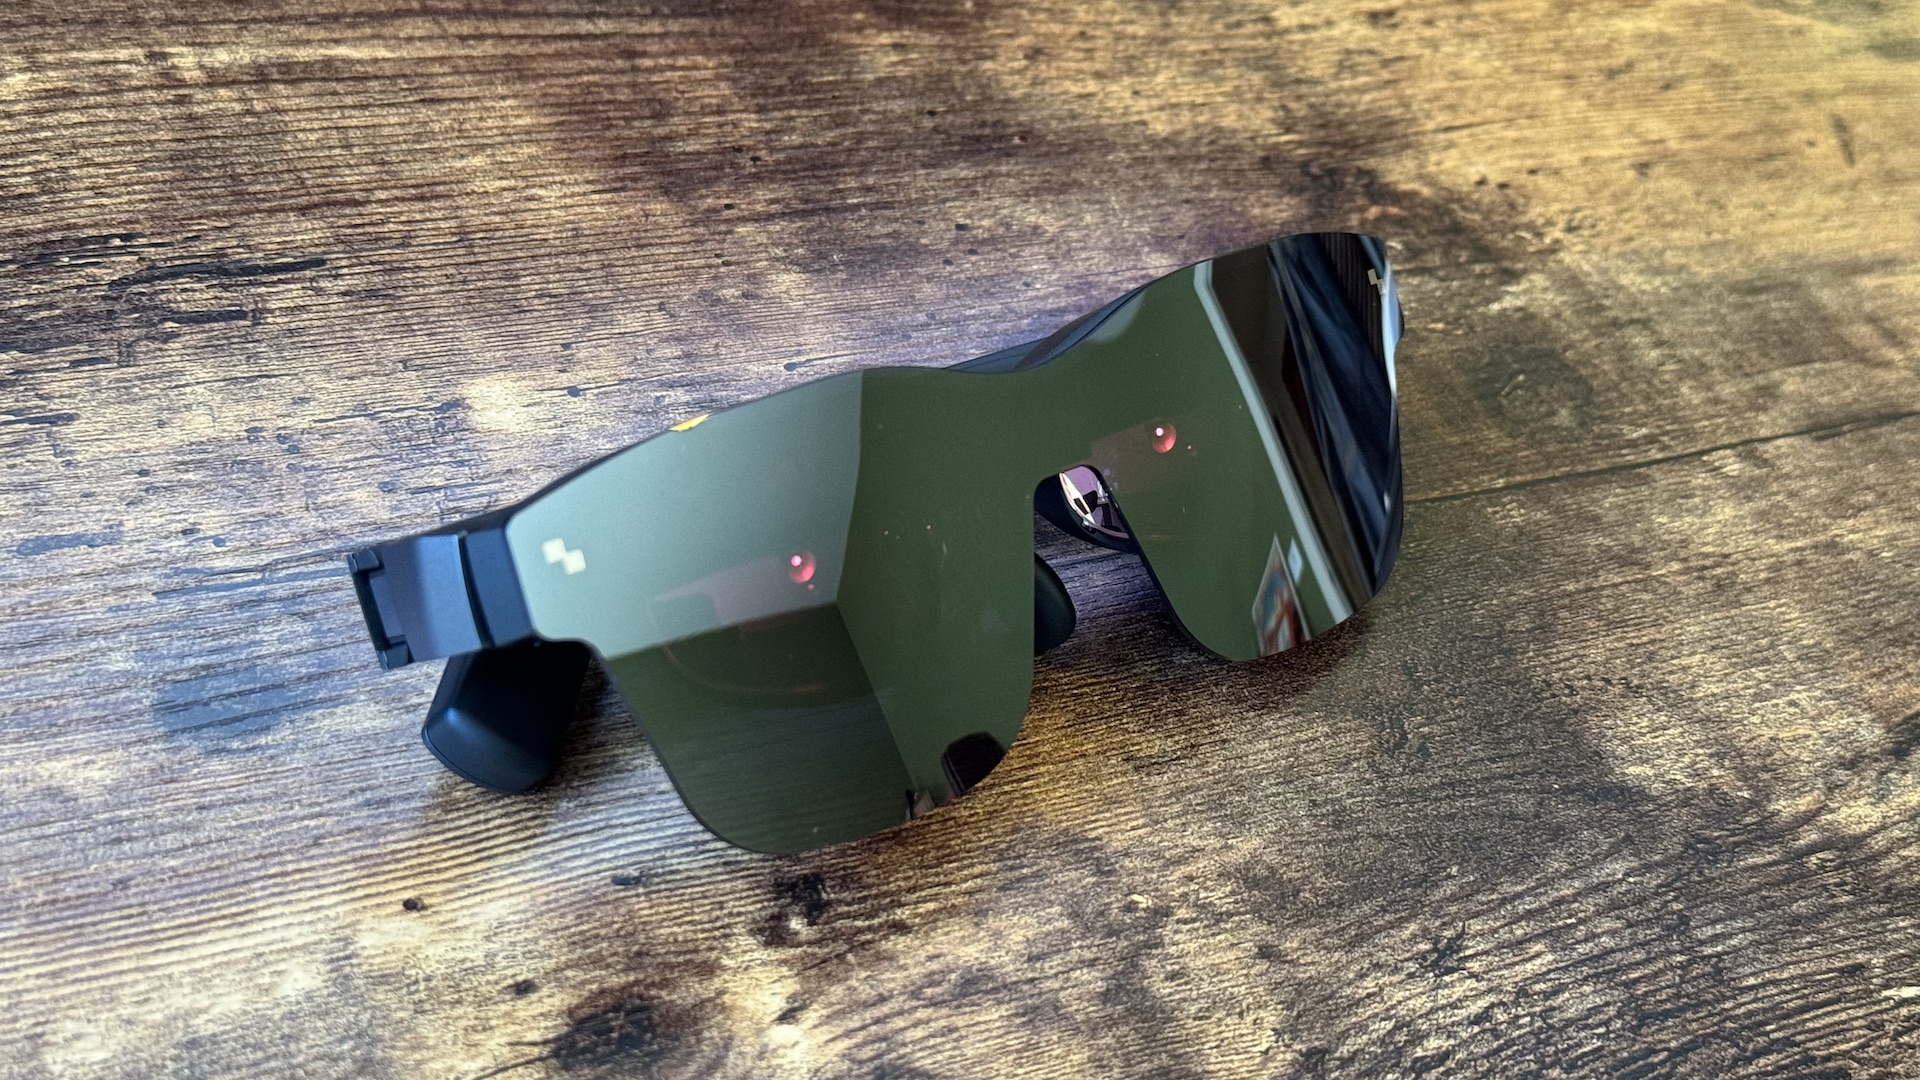 The TCL RayNeo Air 2 smart glasses on steel and wooden surfaces